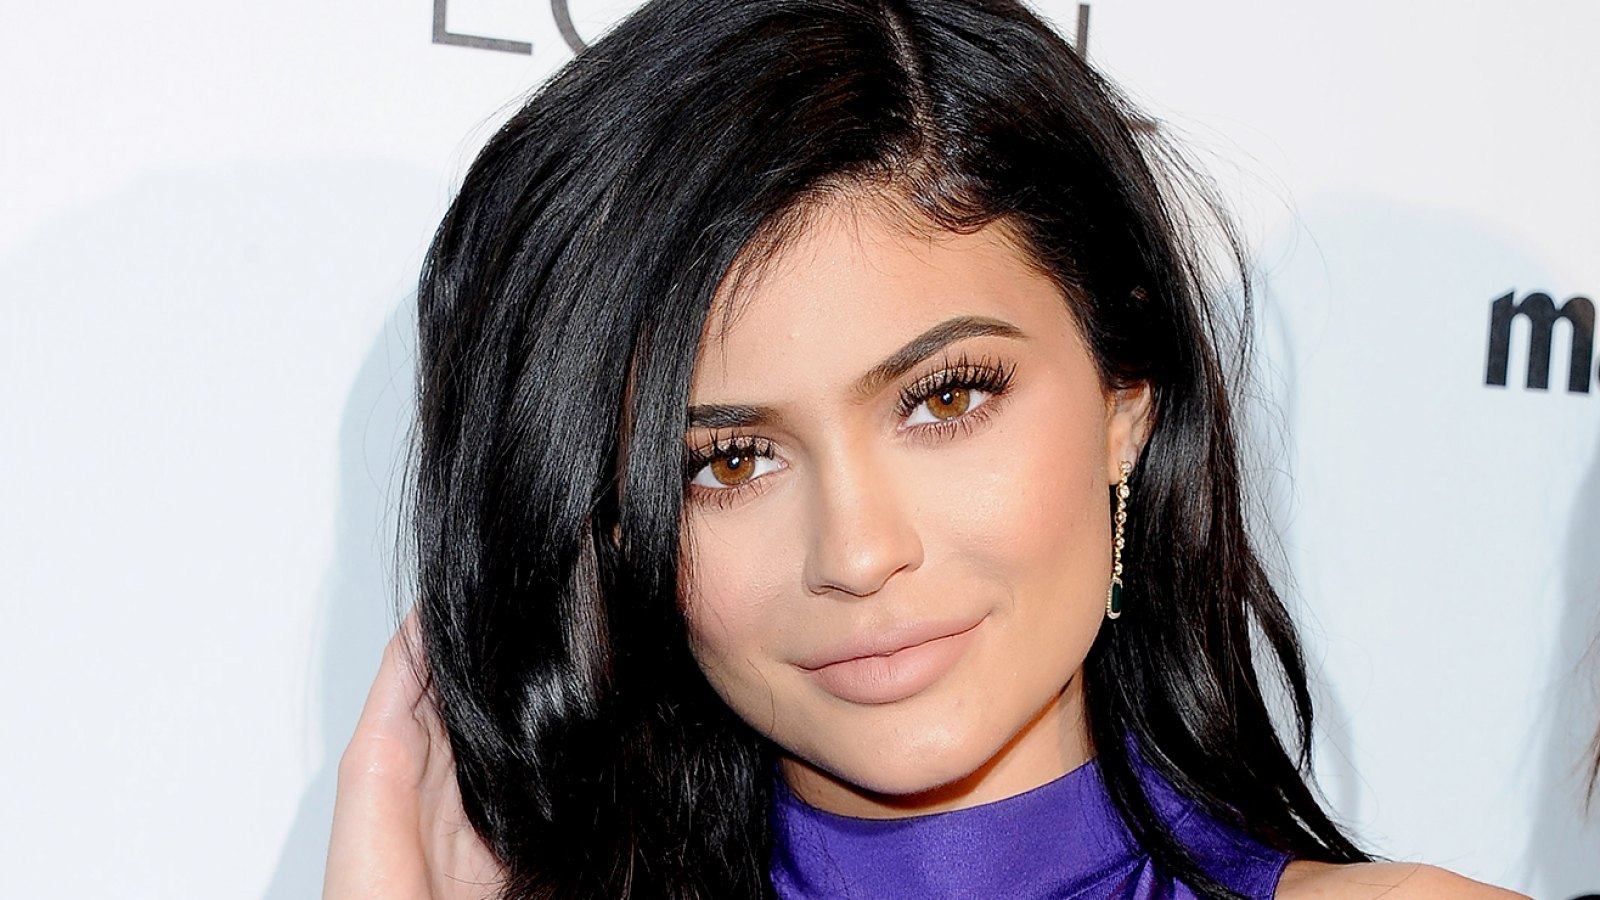 Kylie Jenner's Pop-Up Cosmetics Store in Topanga Westfield Mall